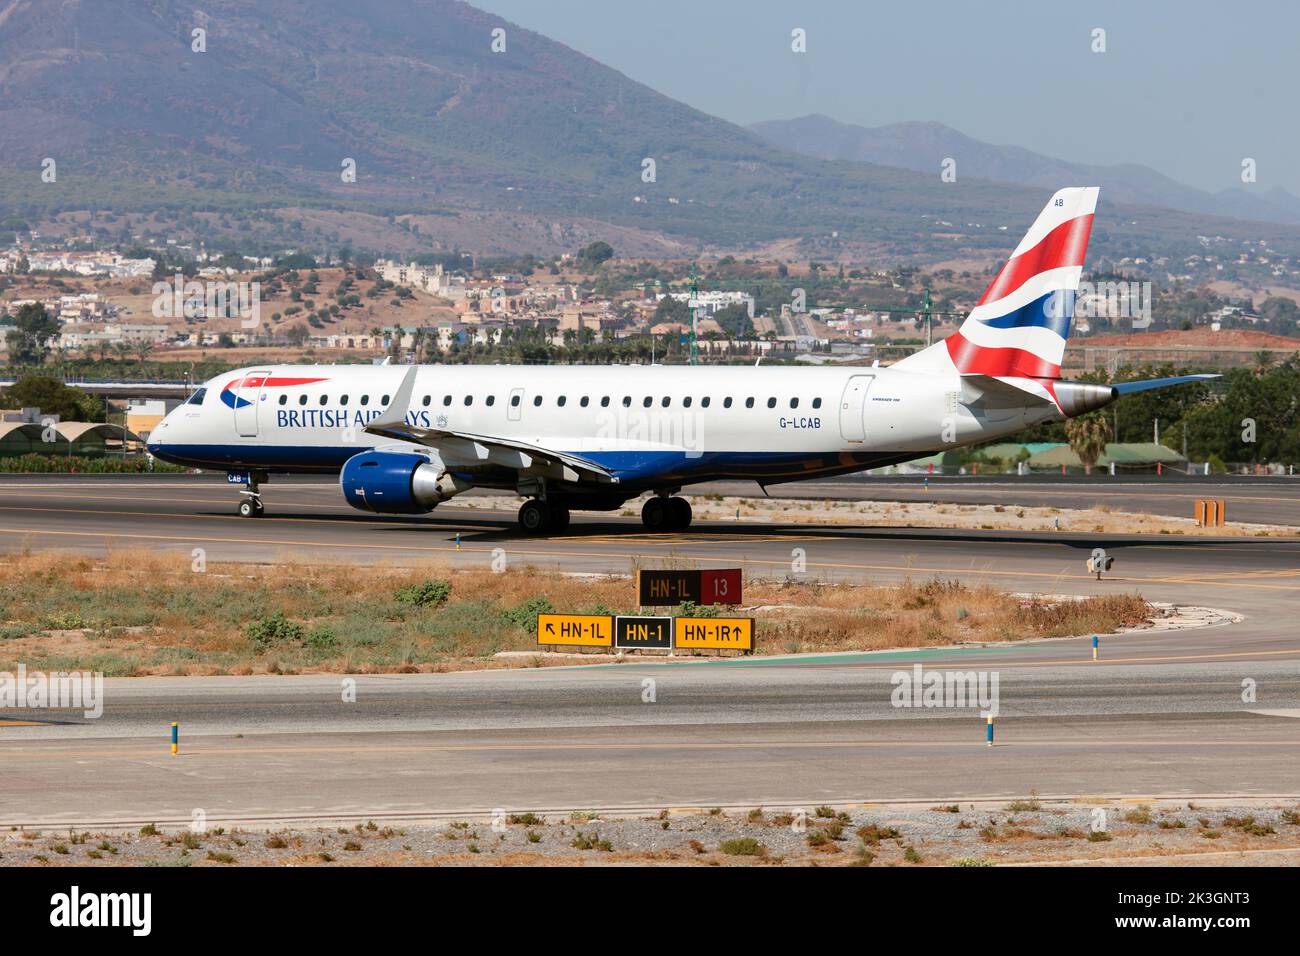 A BA CityFlyer Embraer 190 lining up at Malaga Costa del Sol airport. BA CityFlyer is a British regional airline, a subsidiary of British Airways. It operates a network of domestic and European services from its base at London City Airport. All services operate with BA's full colours, titles and flight numbers Stock Photo